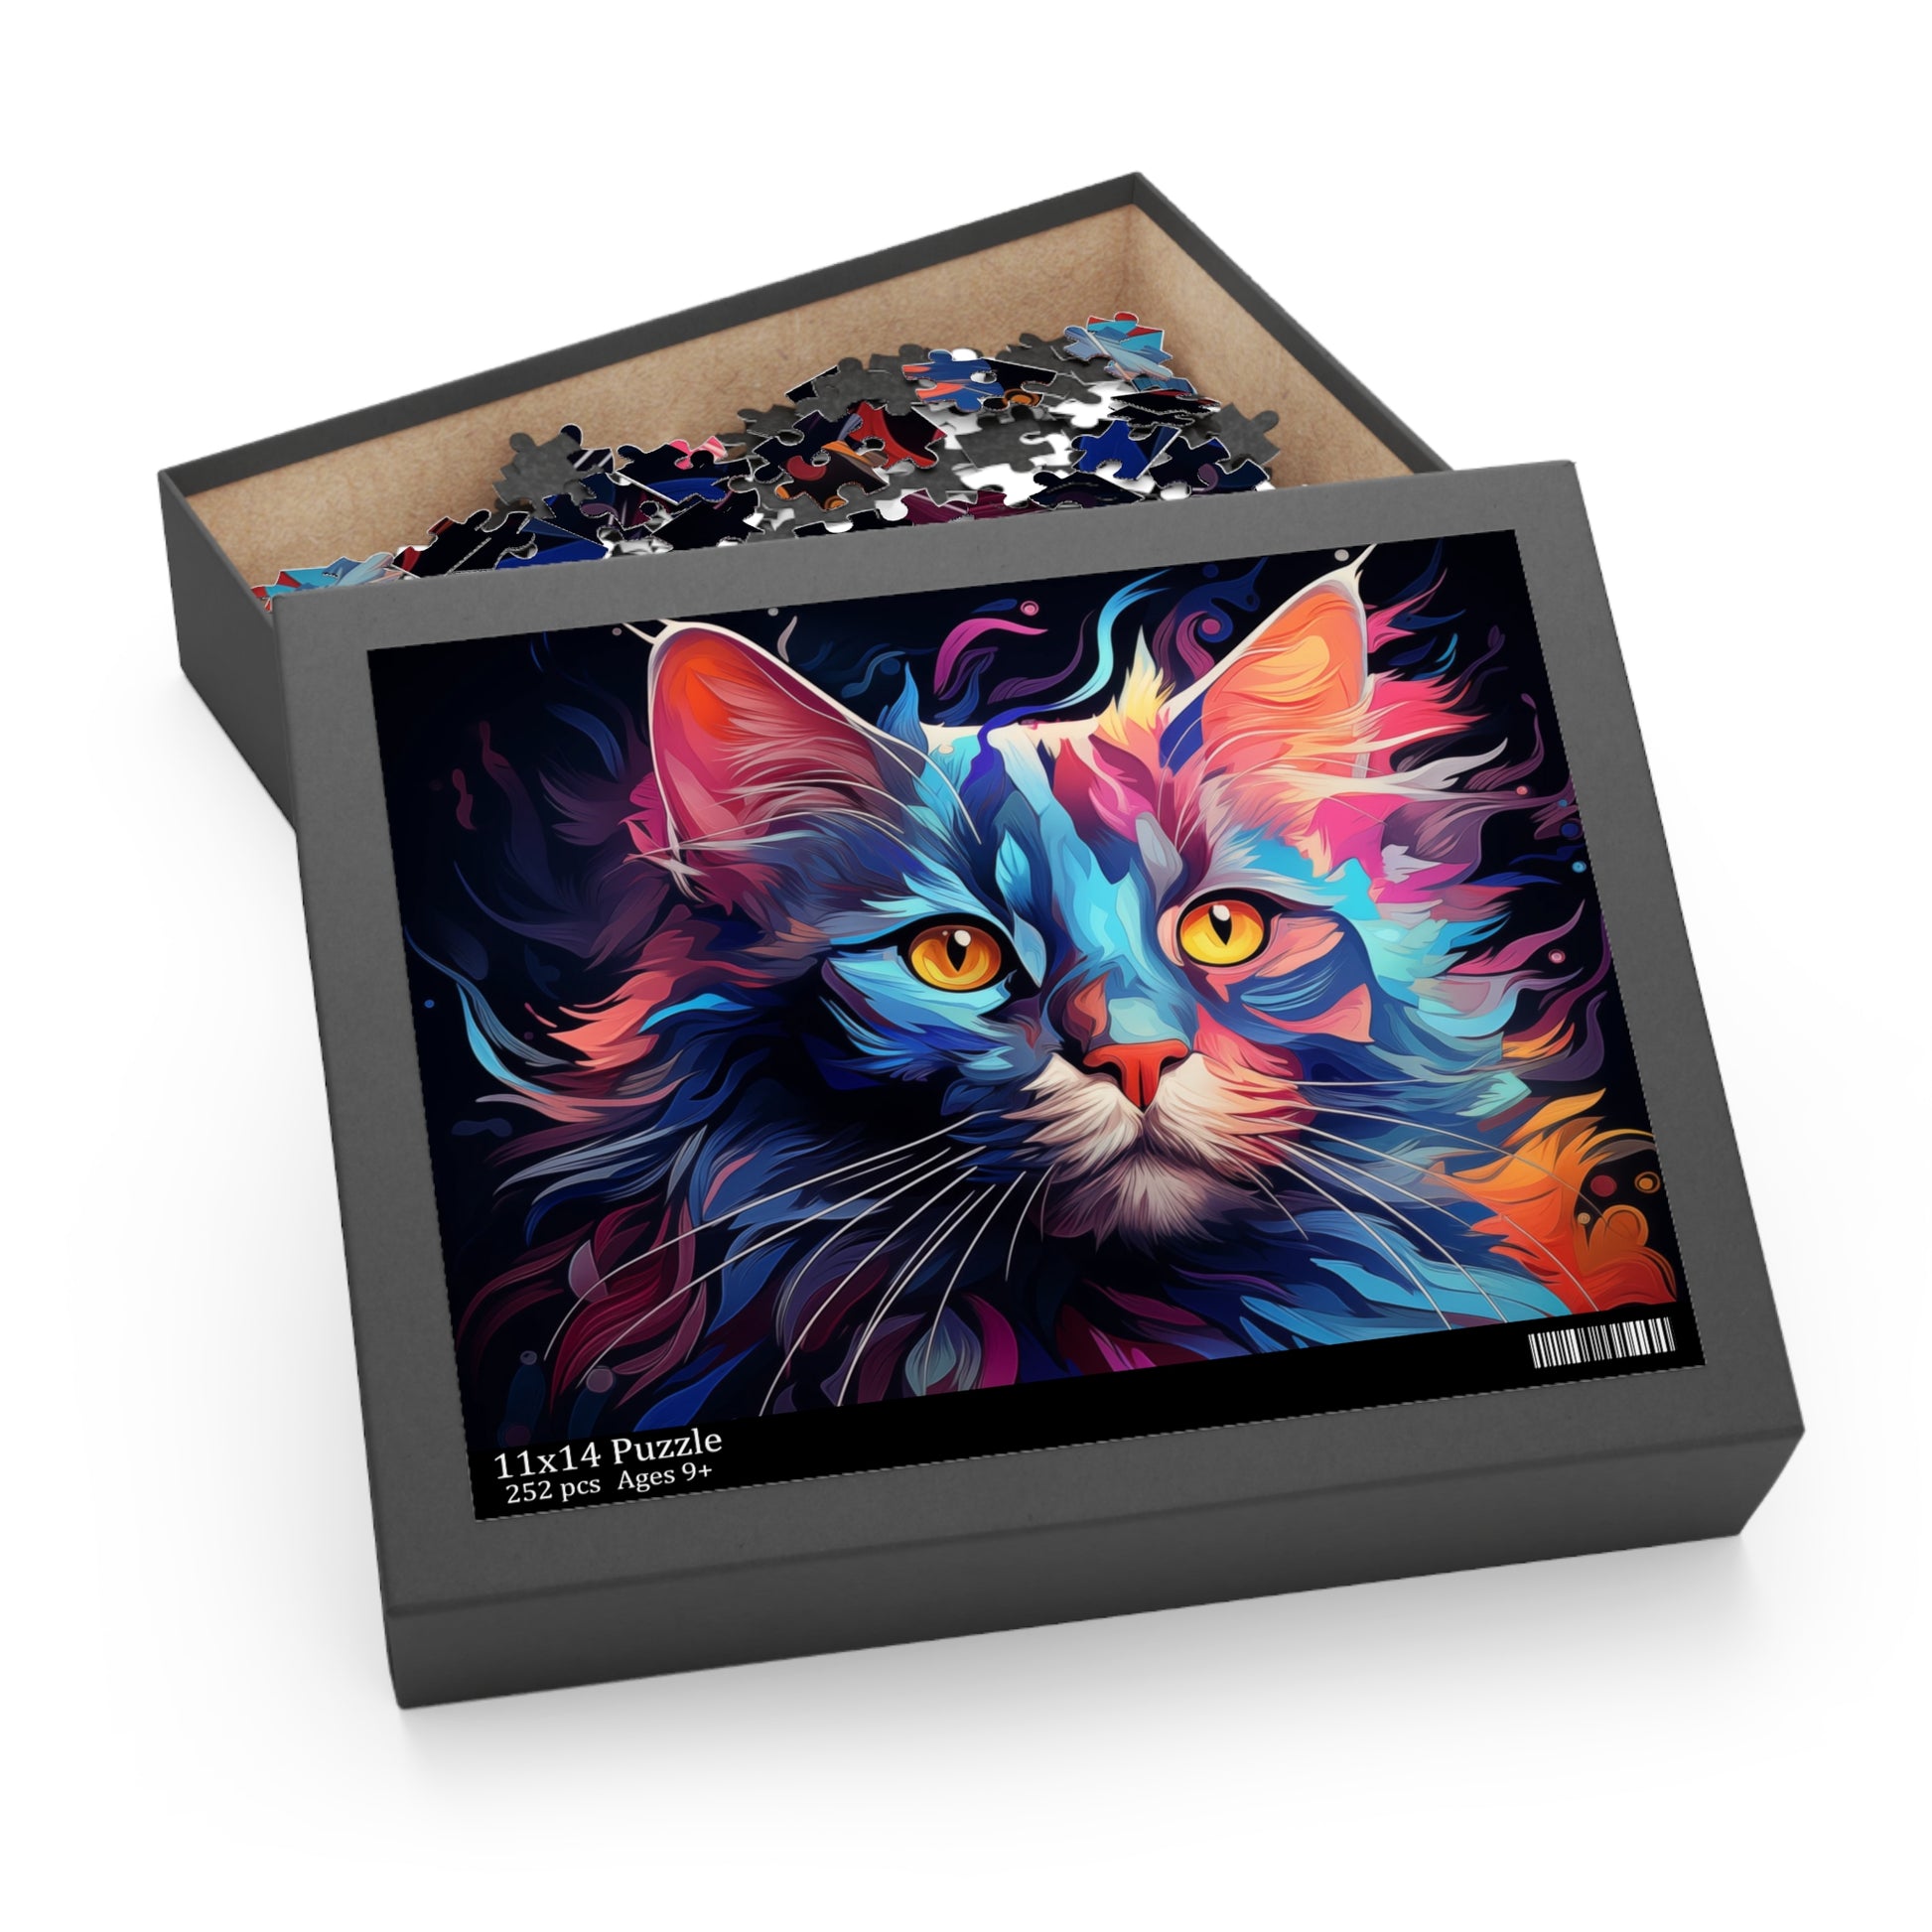 Copy of Abstract Cat Oil Paint Jigsaw Puzzle Adult Birthday Business Jigsaw Puzzle Gift for Him Funny Humorous Indoor Outdoor Game Gift For Her Online-8